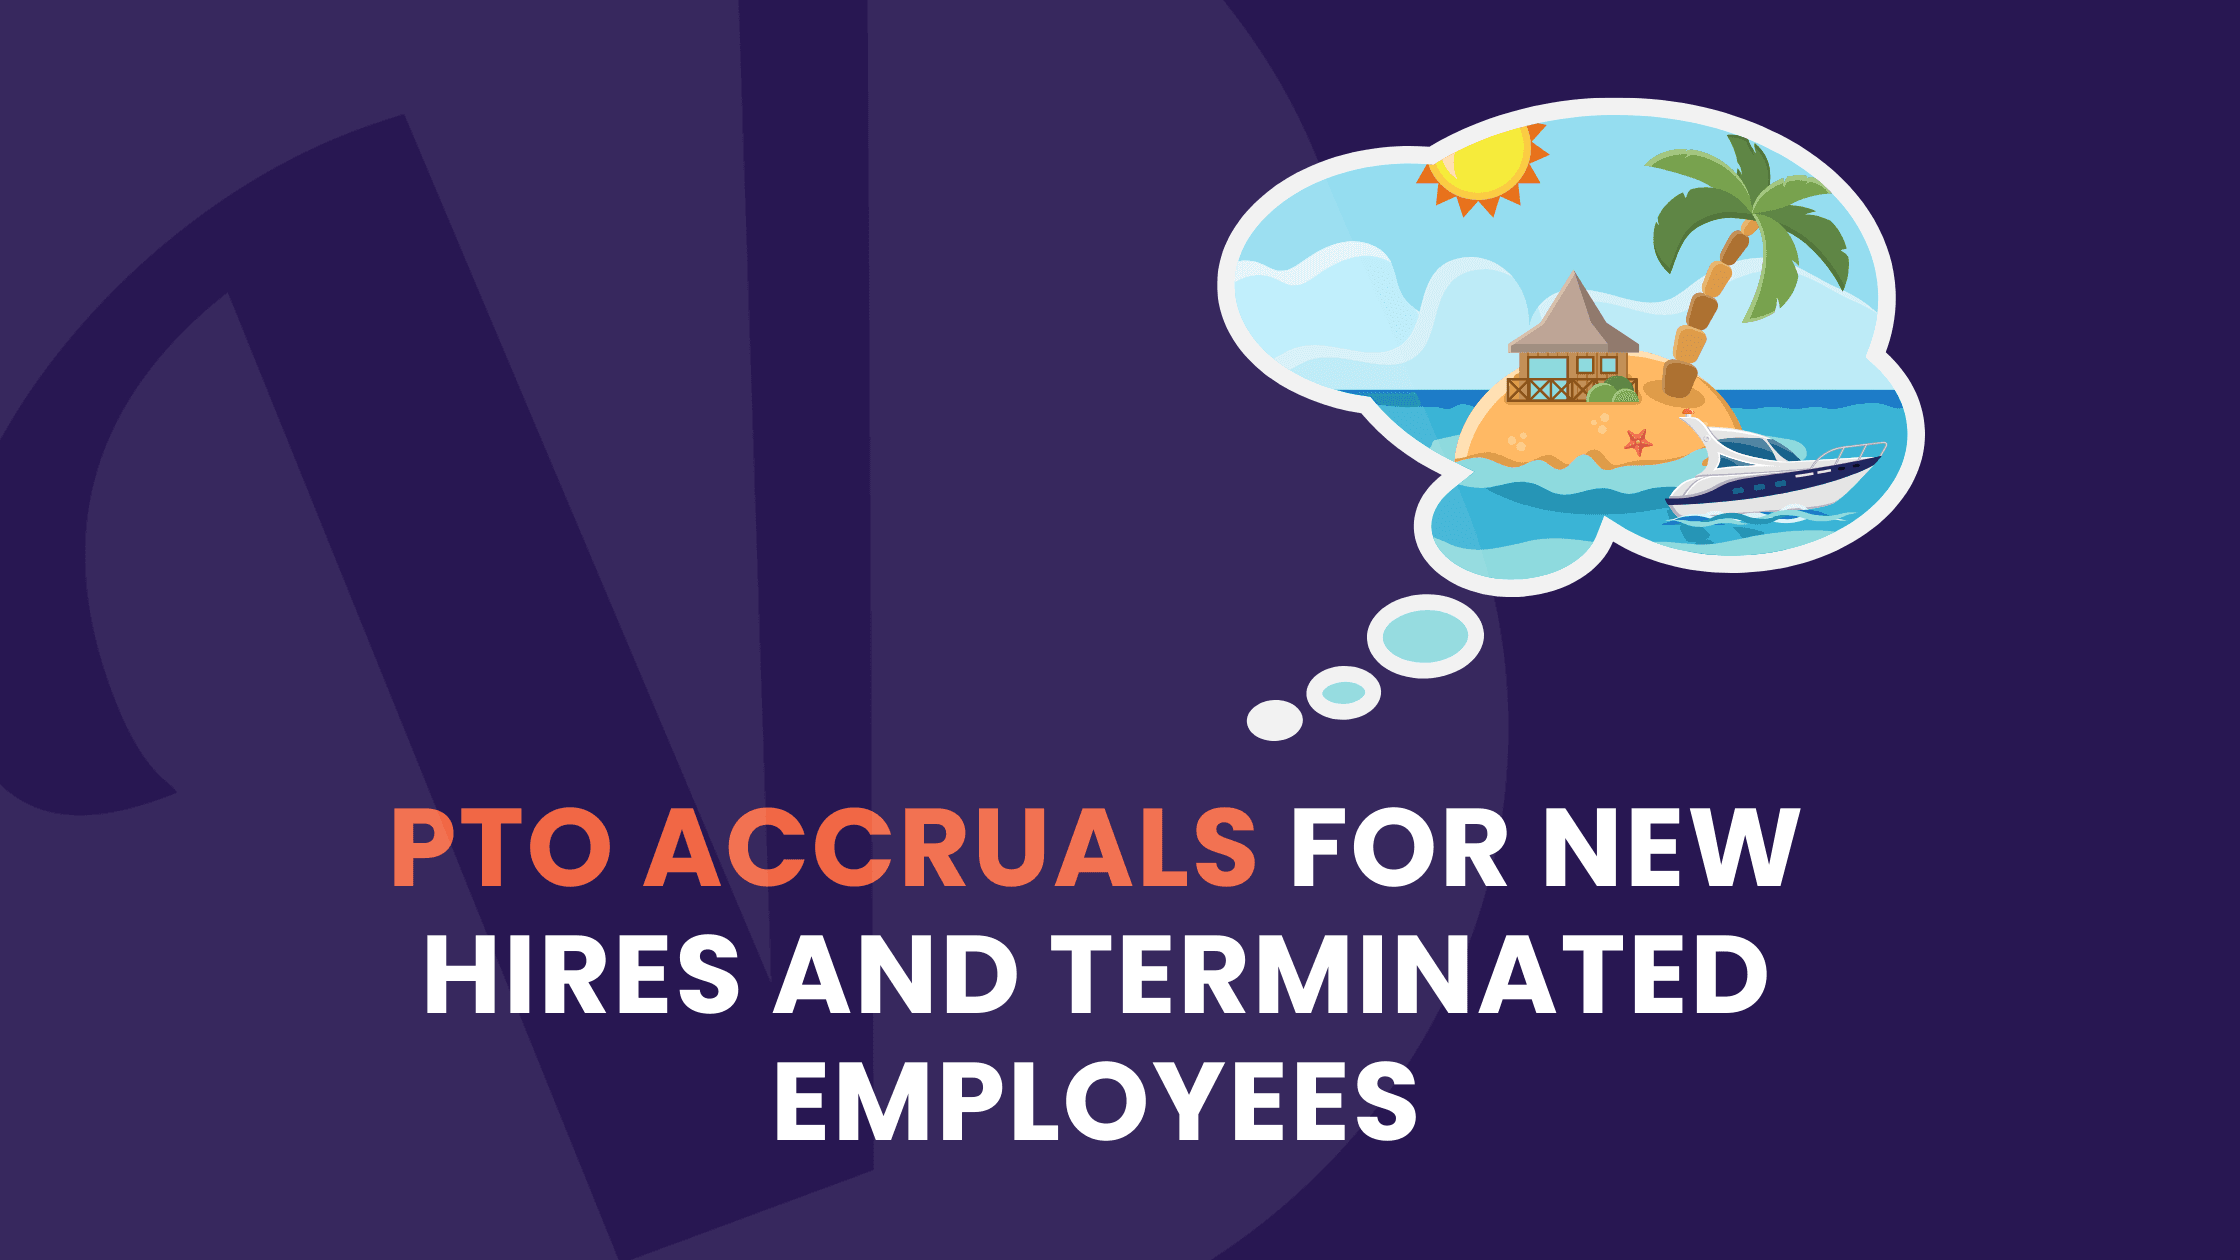 Handling PTO Accruals for New Hires and Terminated Employees